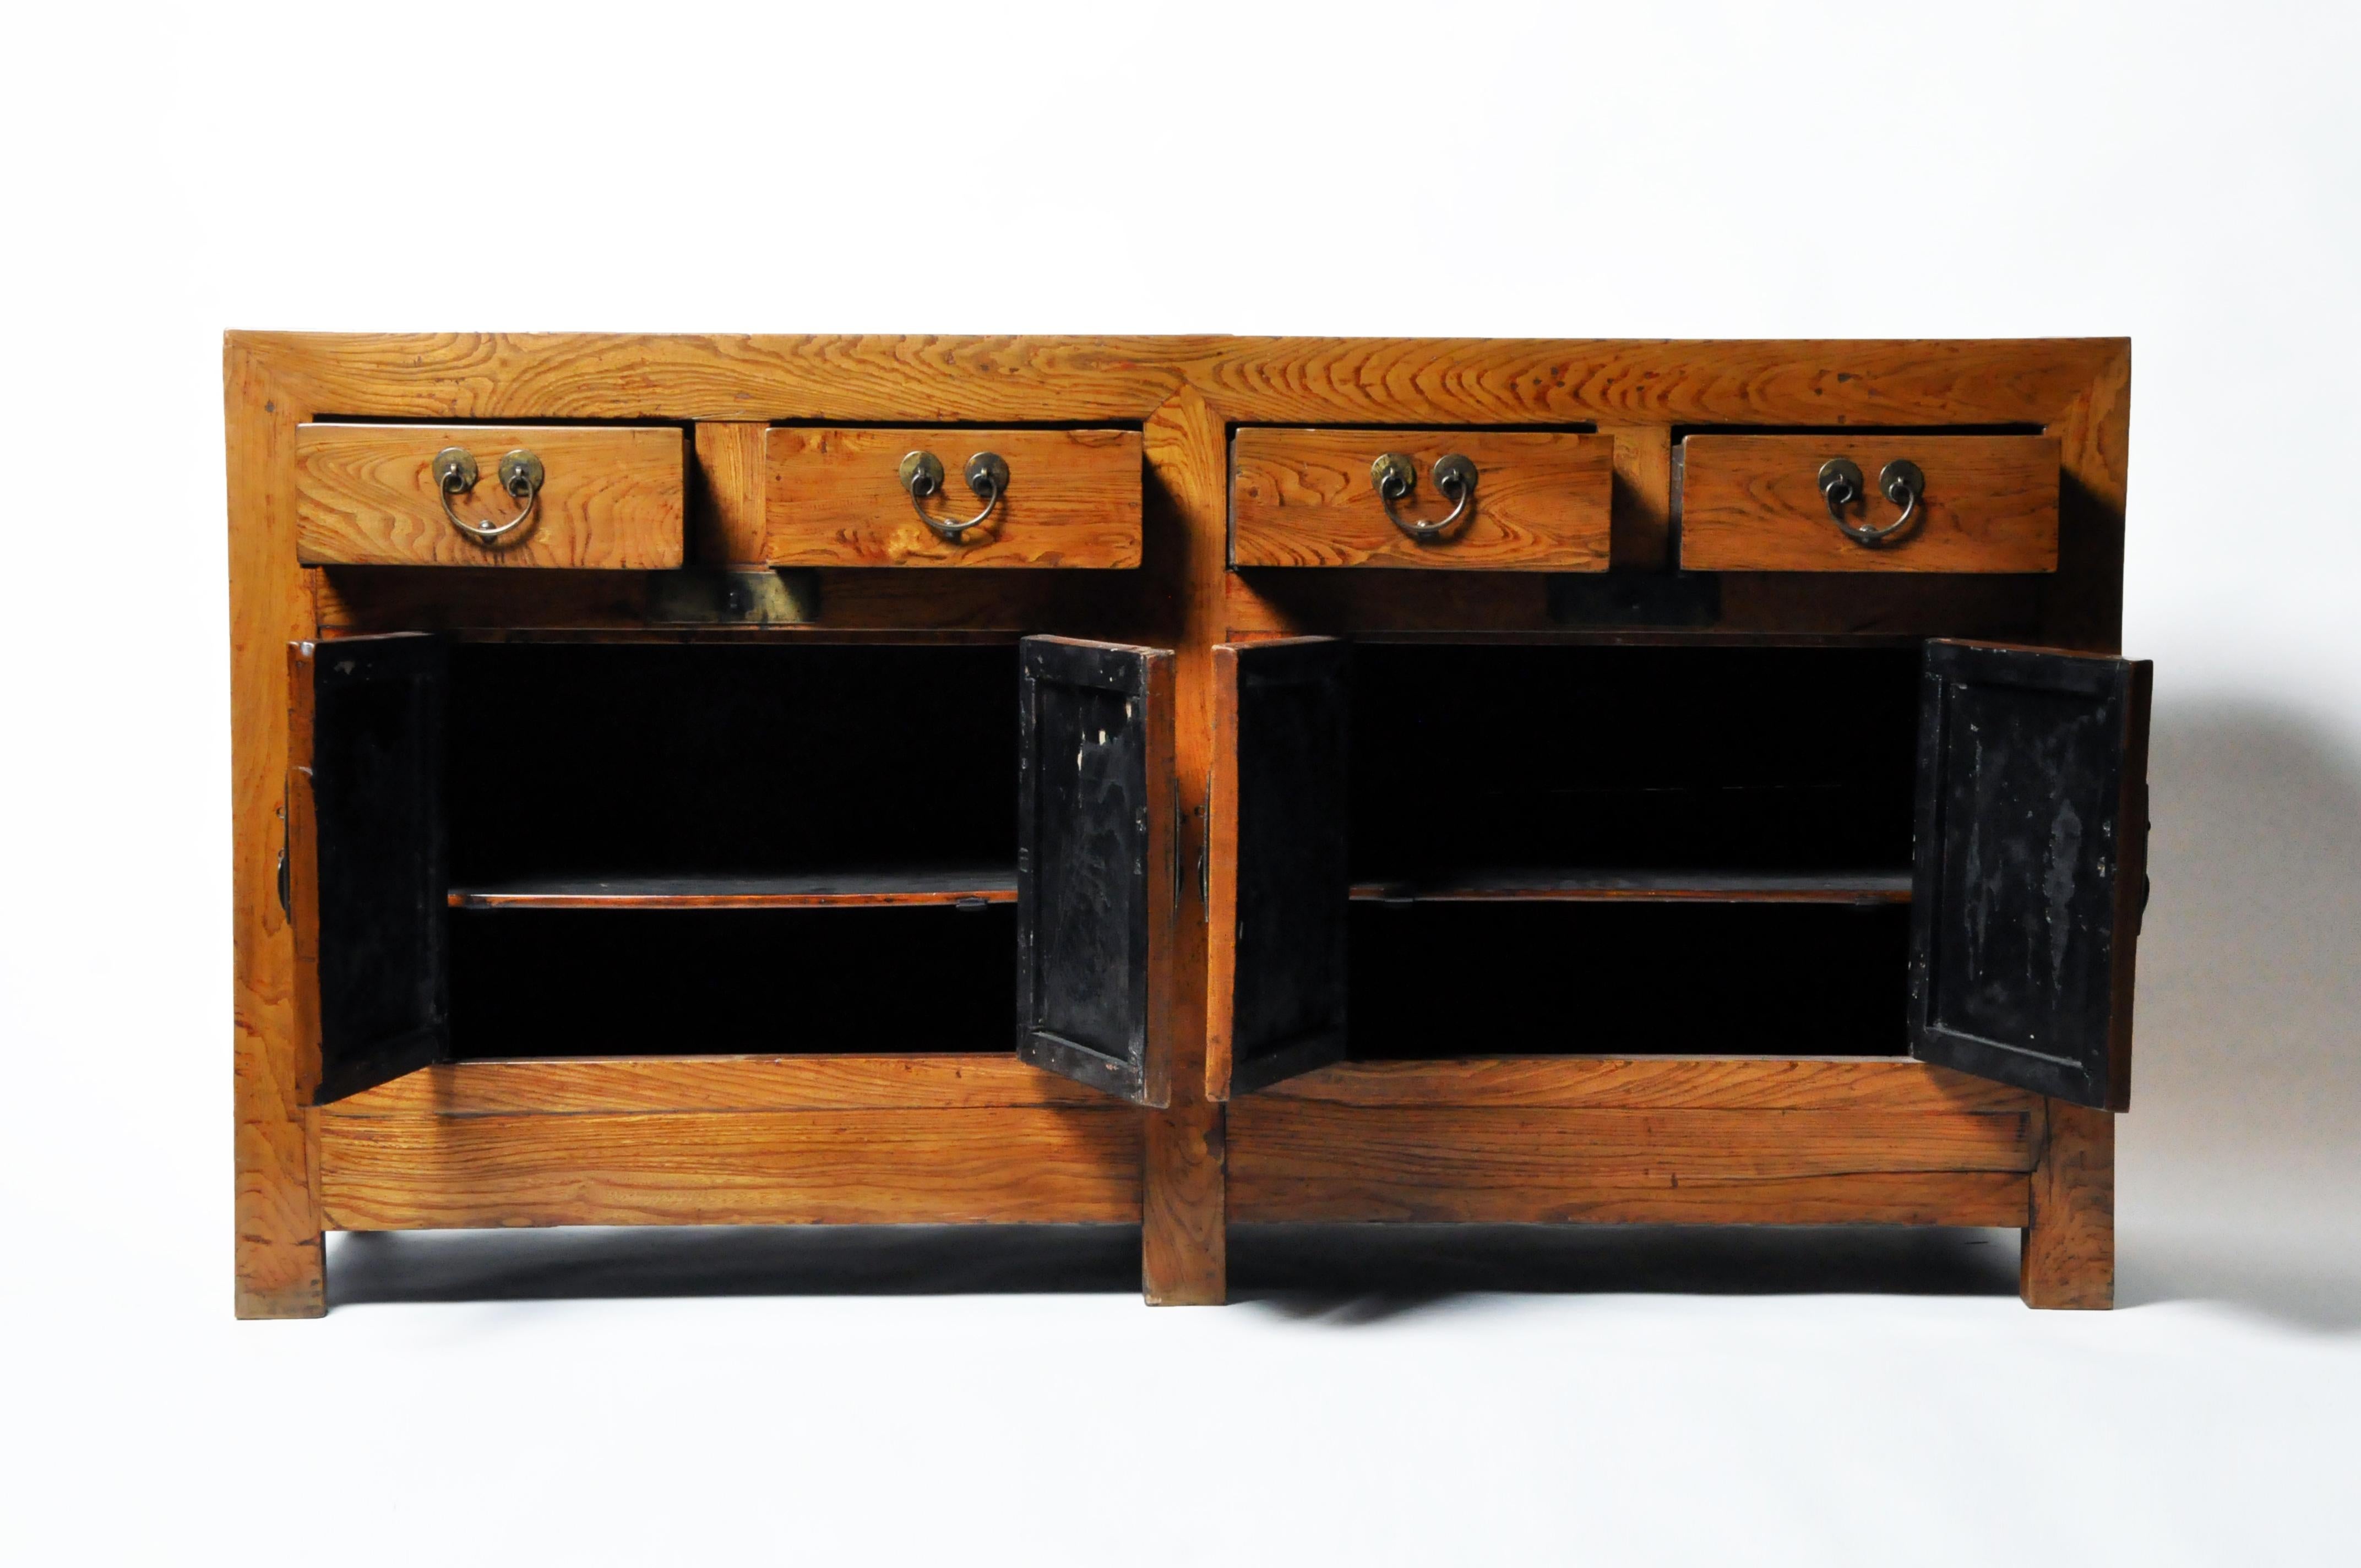 20th Century Chinese Sideboard with Four Drawers and Two Pairs of Doors